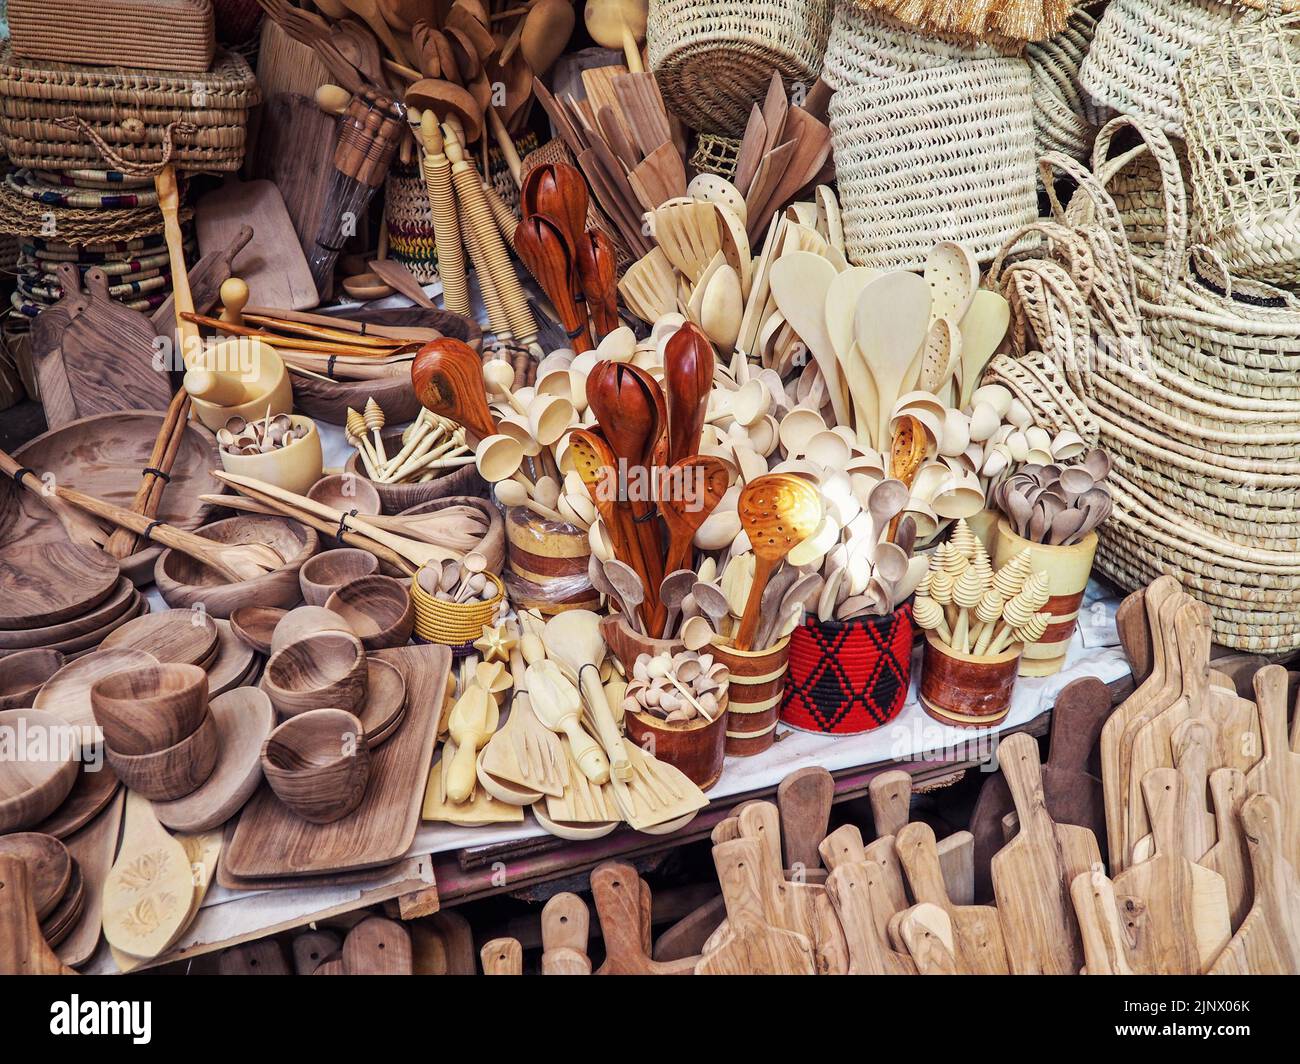 Wooden handmade bowls, spoons, boards, kitchen utensils and baskets on display at street market Stock Photo